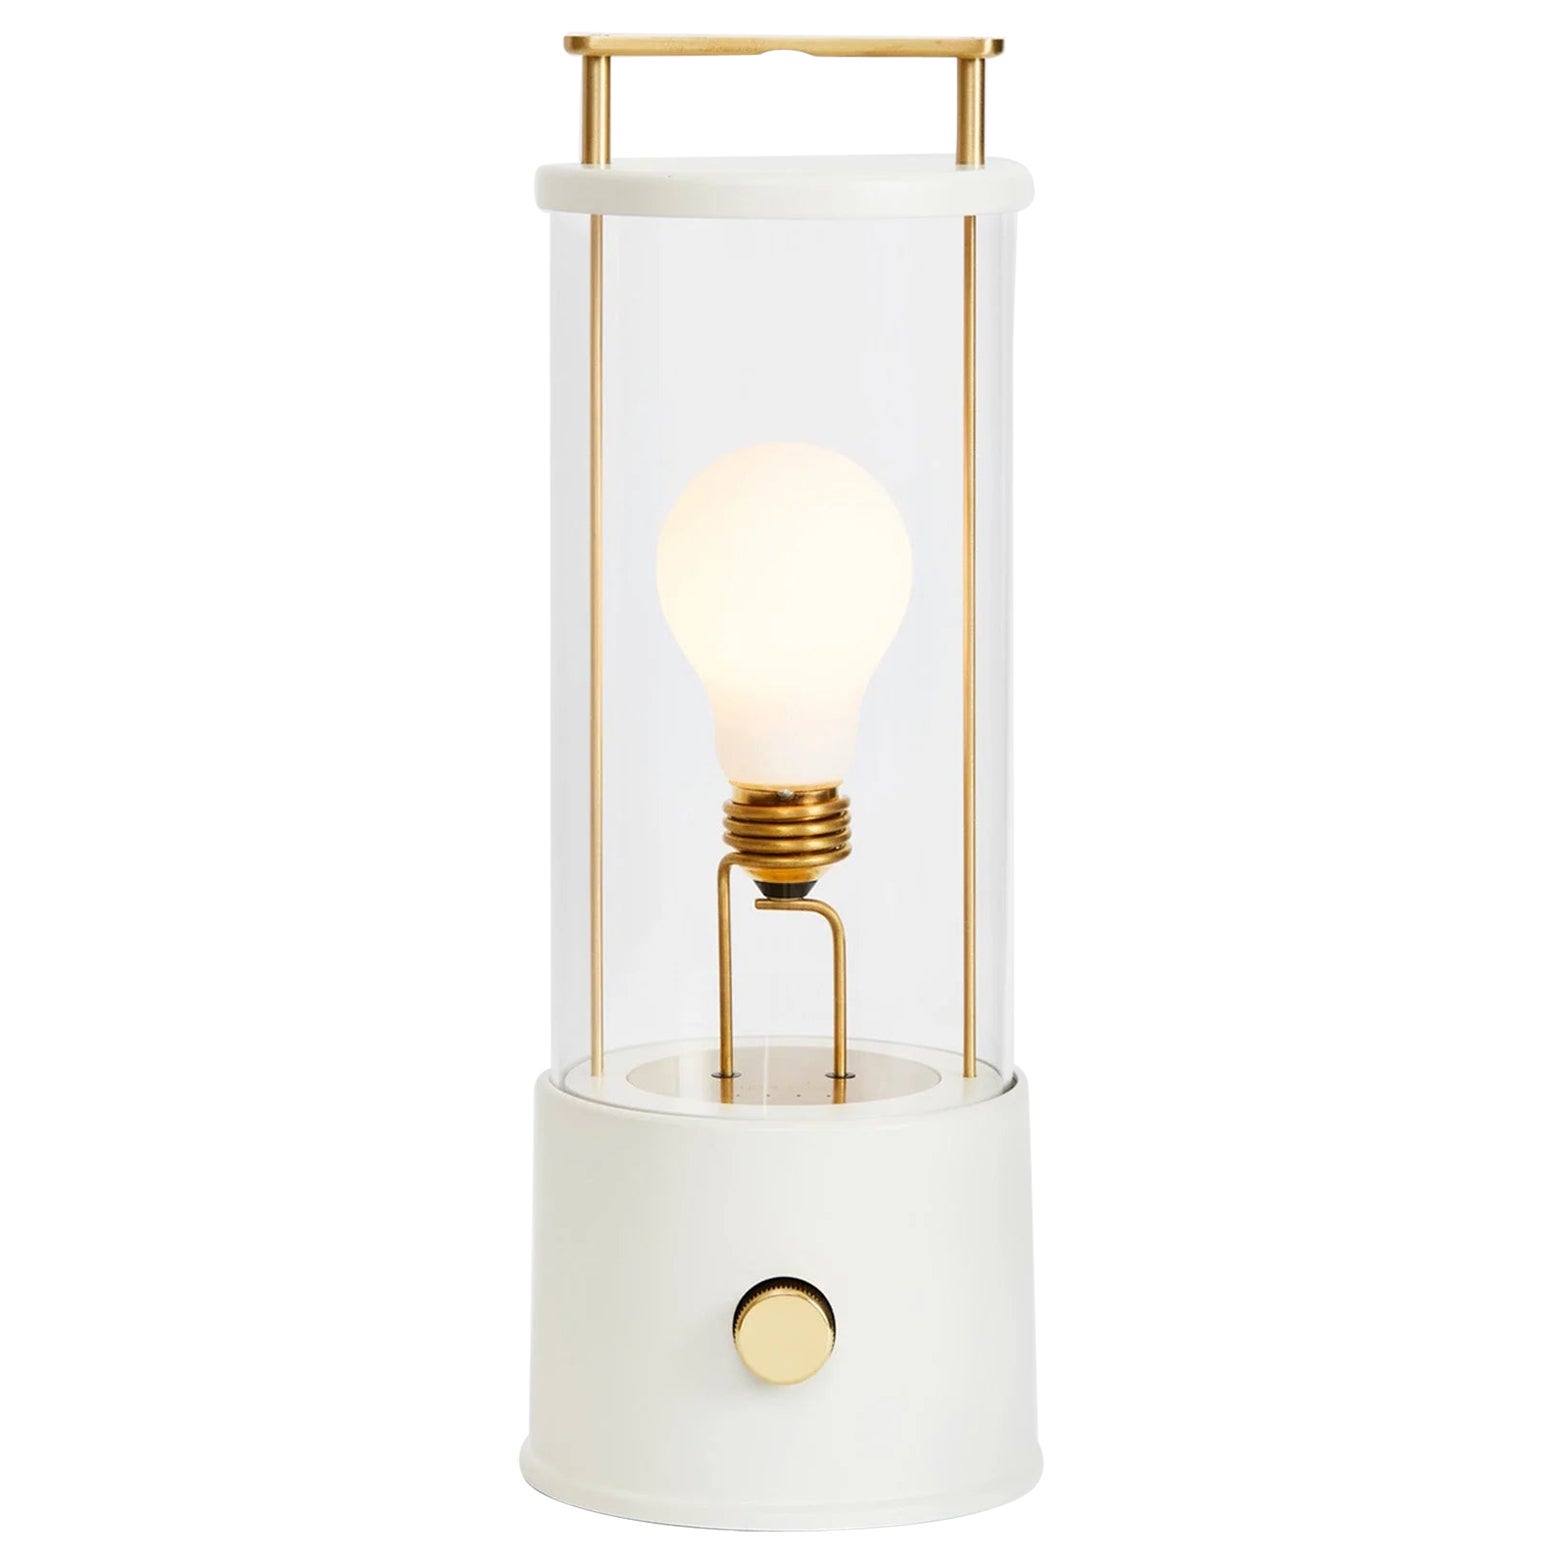 'The Muse' Portable Lamp by Farrow & Ball x Tala in Candlenut White For Sale